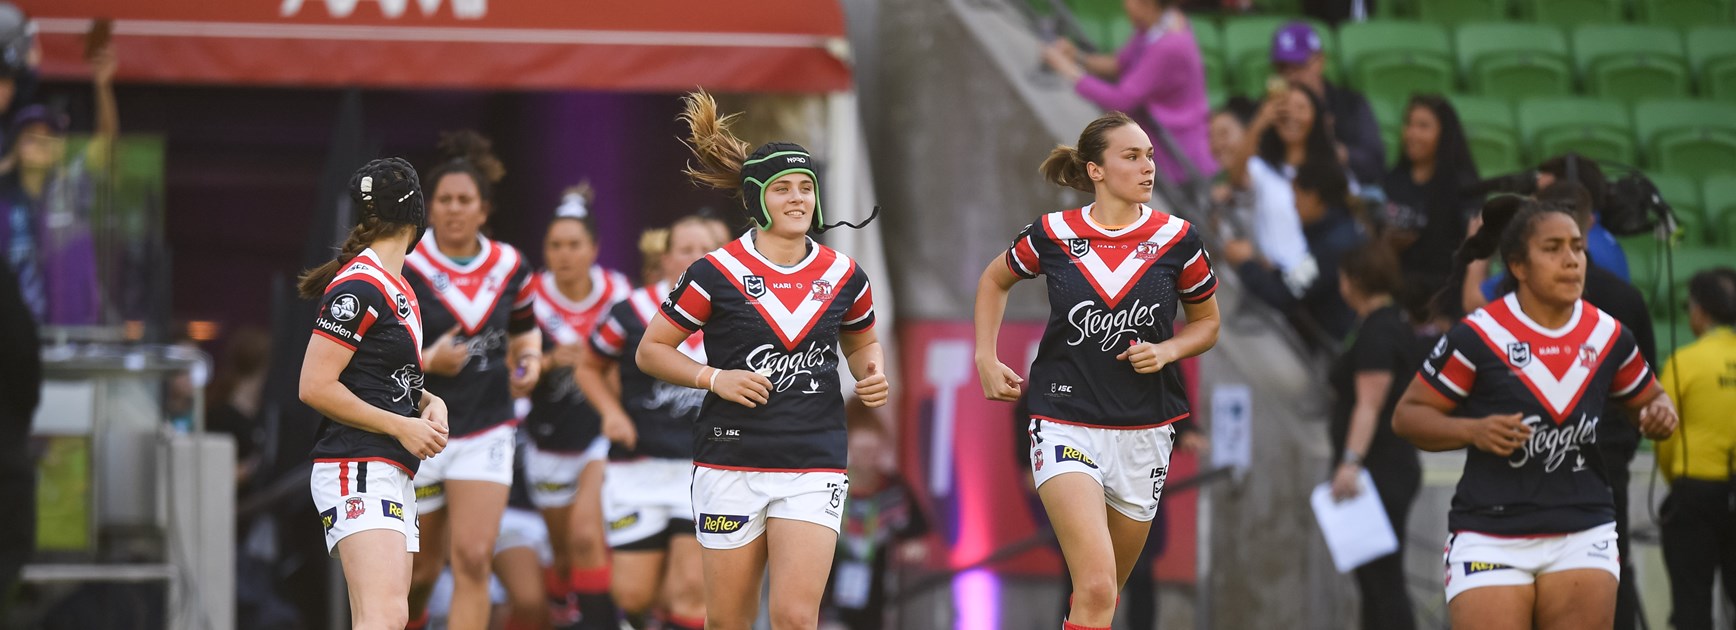 The Roosters during the 2019 NRLW season.